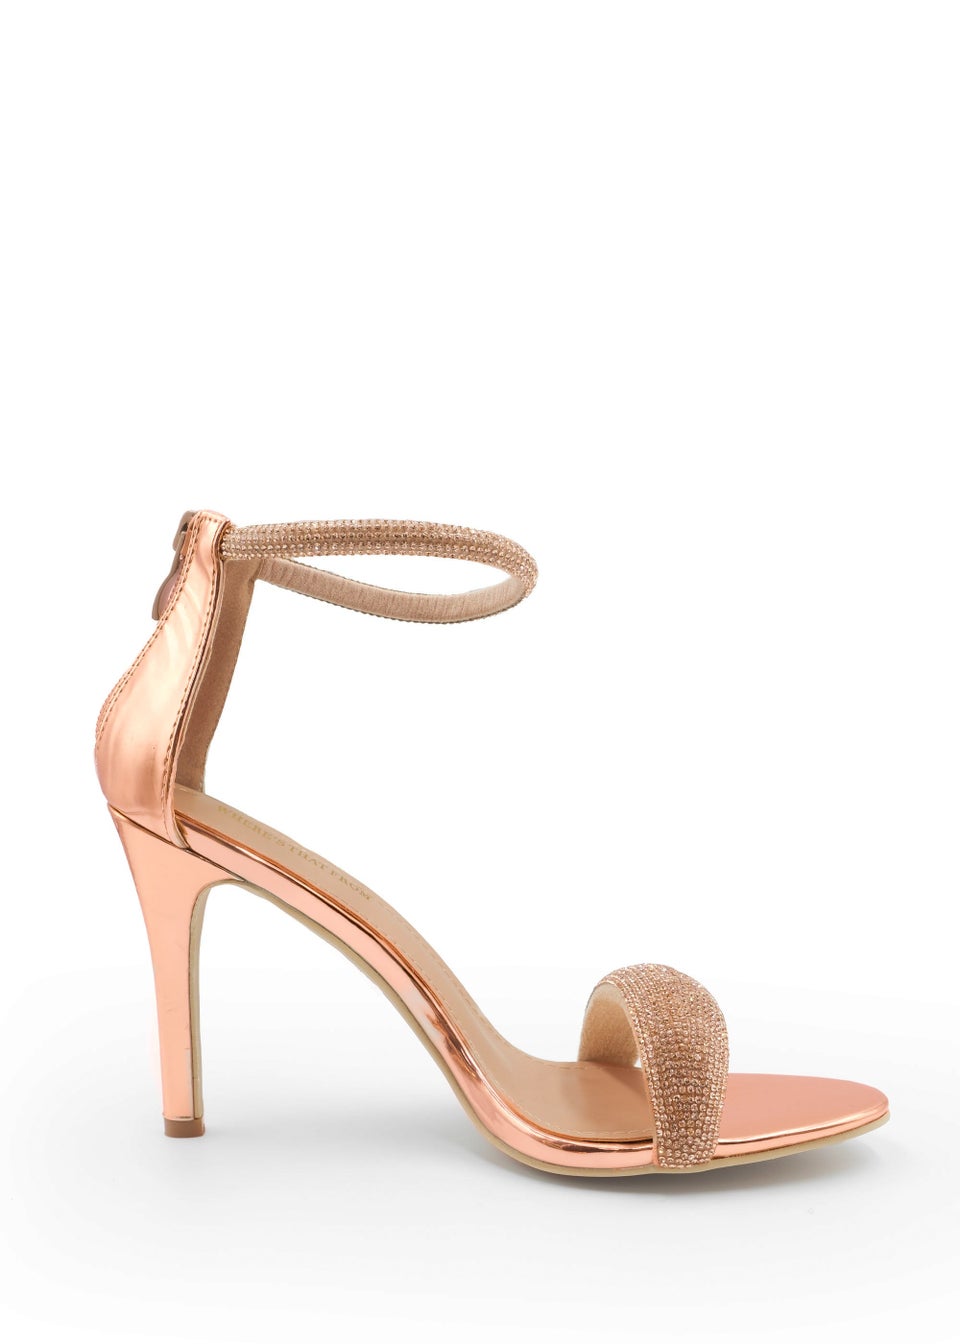 Where's That From Rose Gold Sabra High Heel Sandals